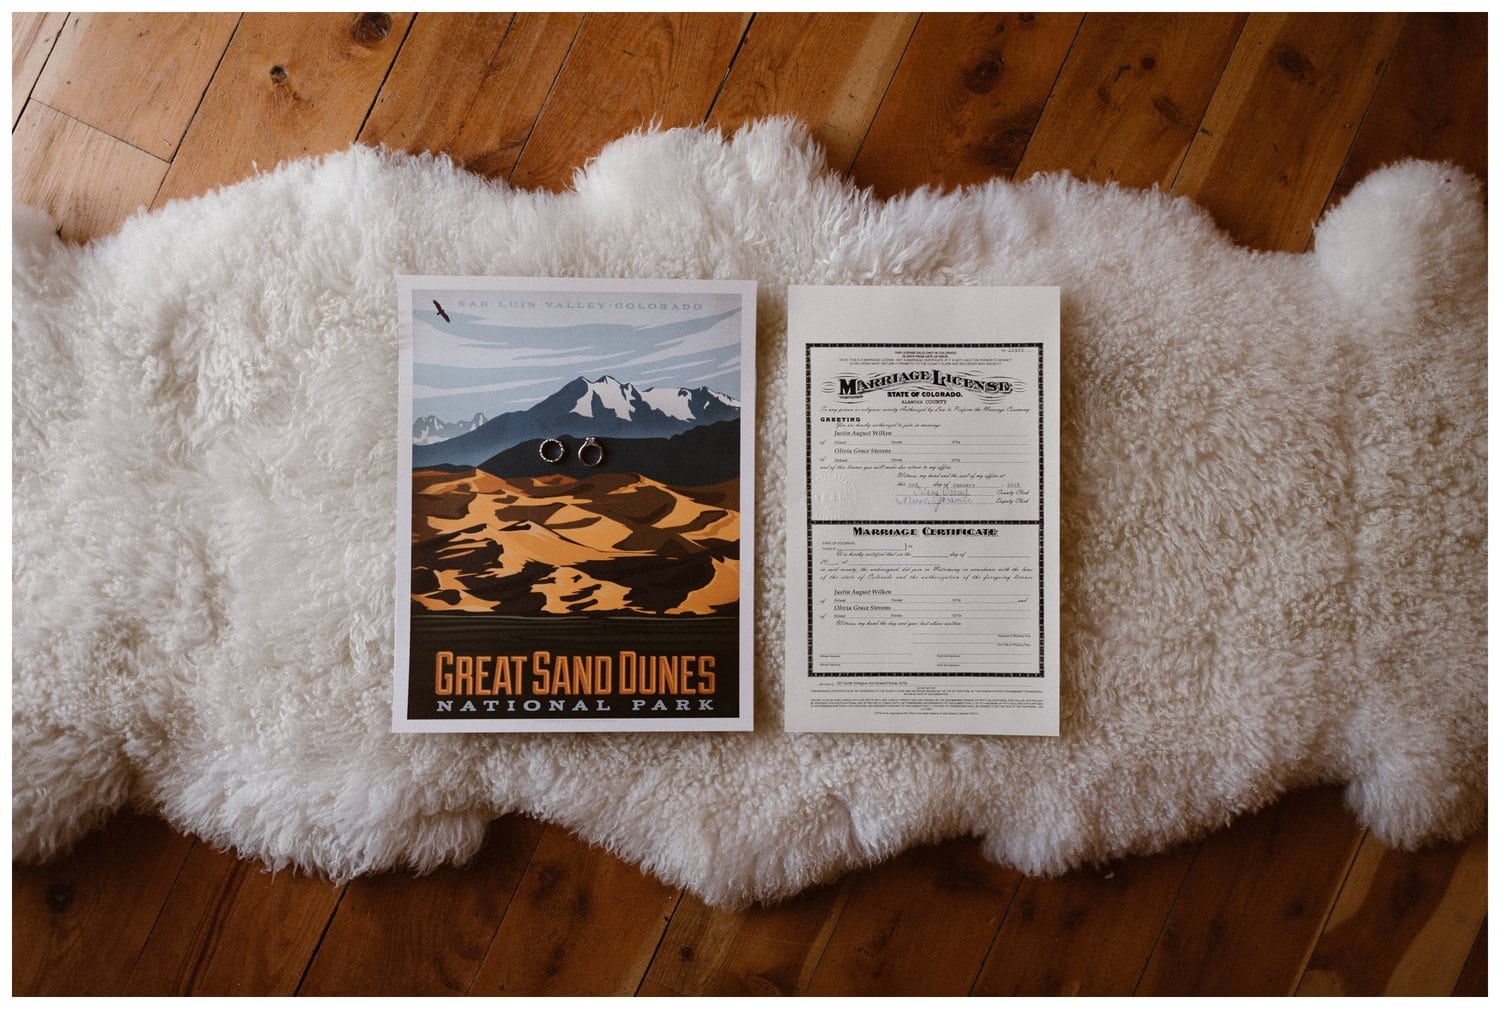 Flay lay of bride and groom's rings, marriage license, and poster of Great Sand Dunes National Park. 